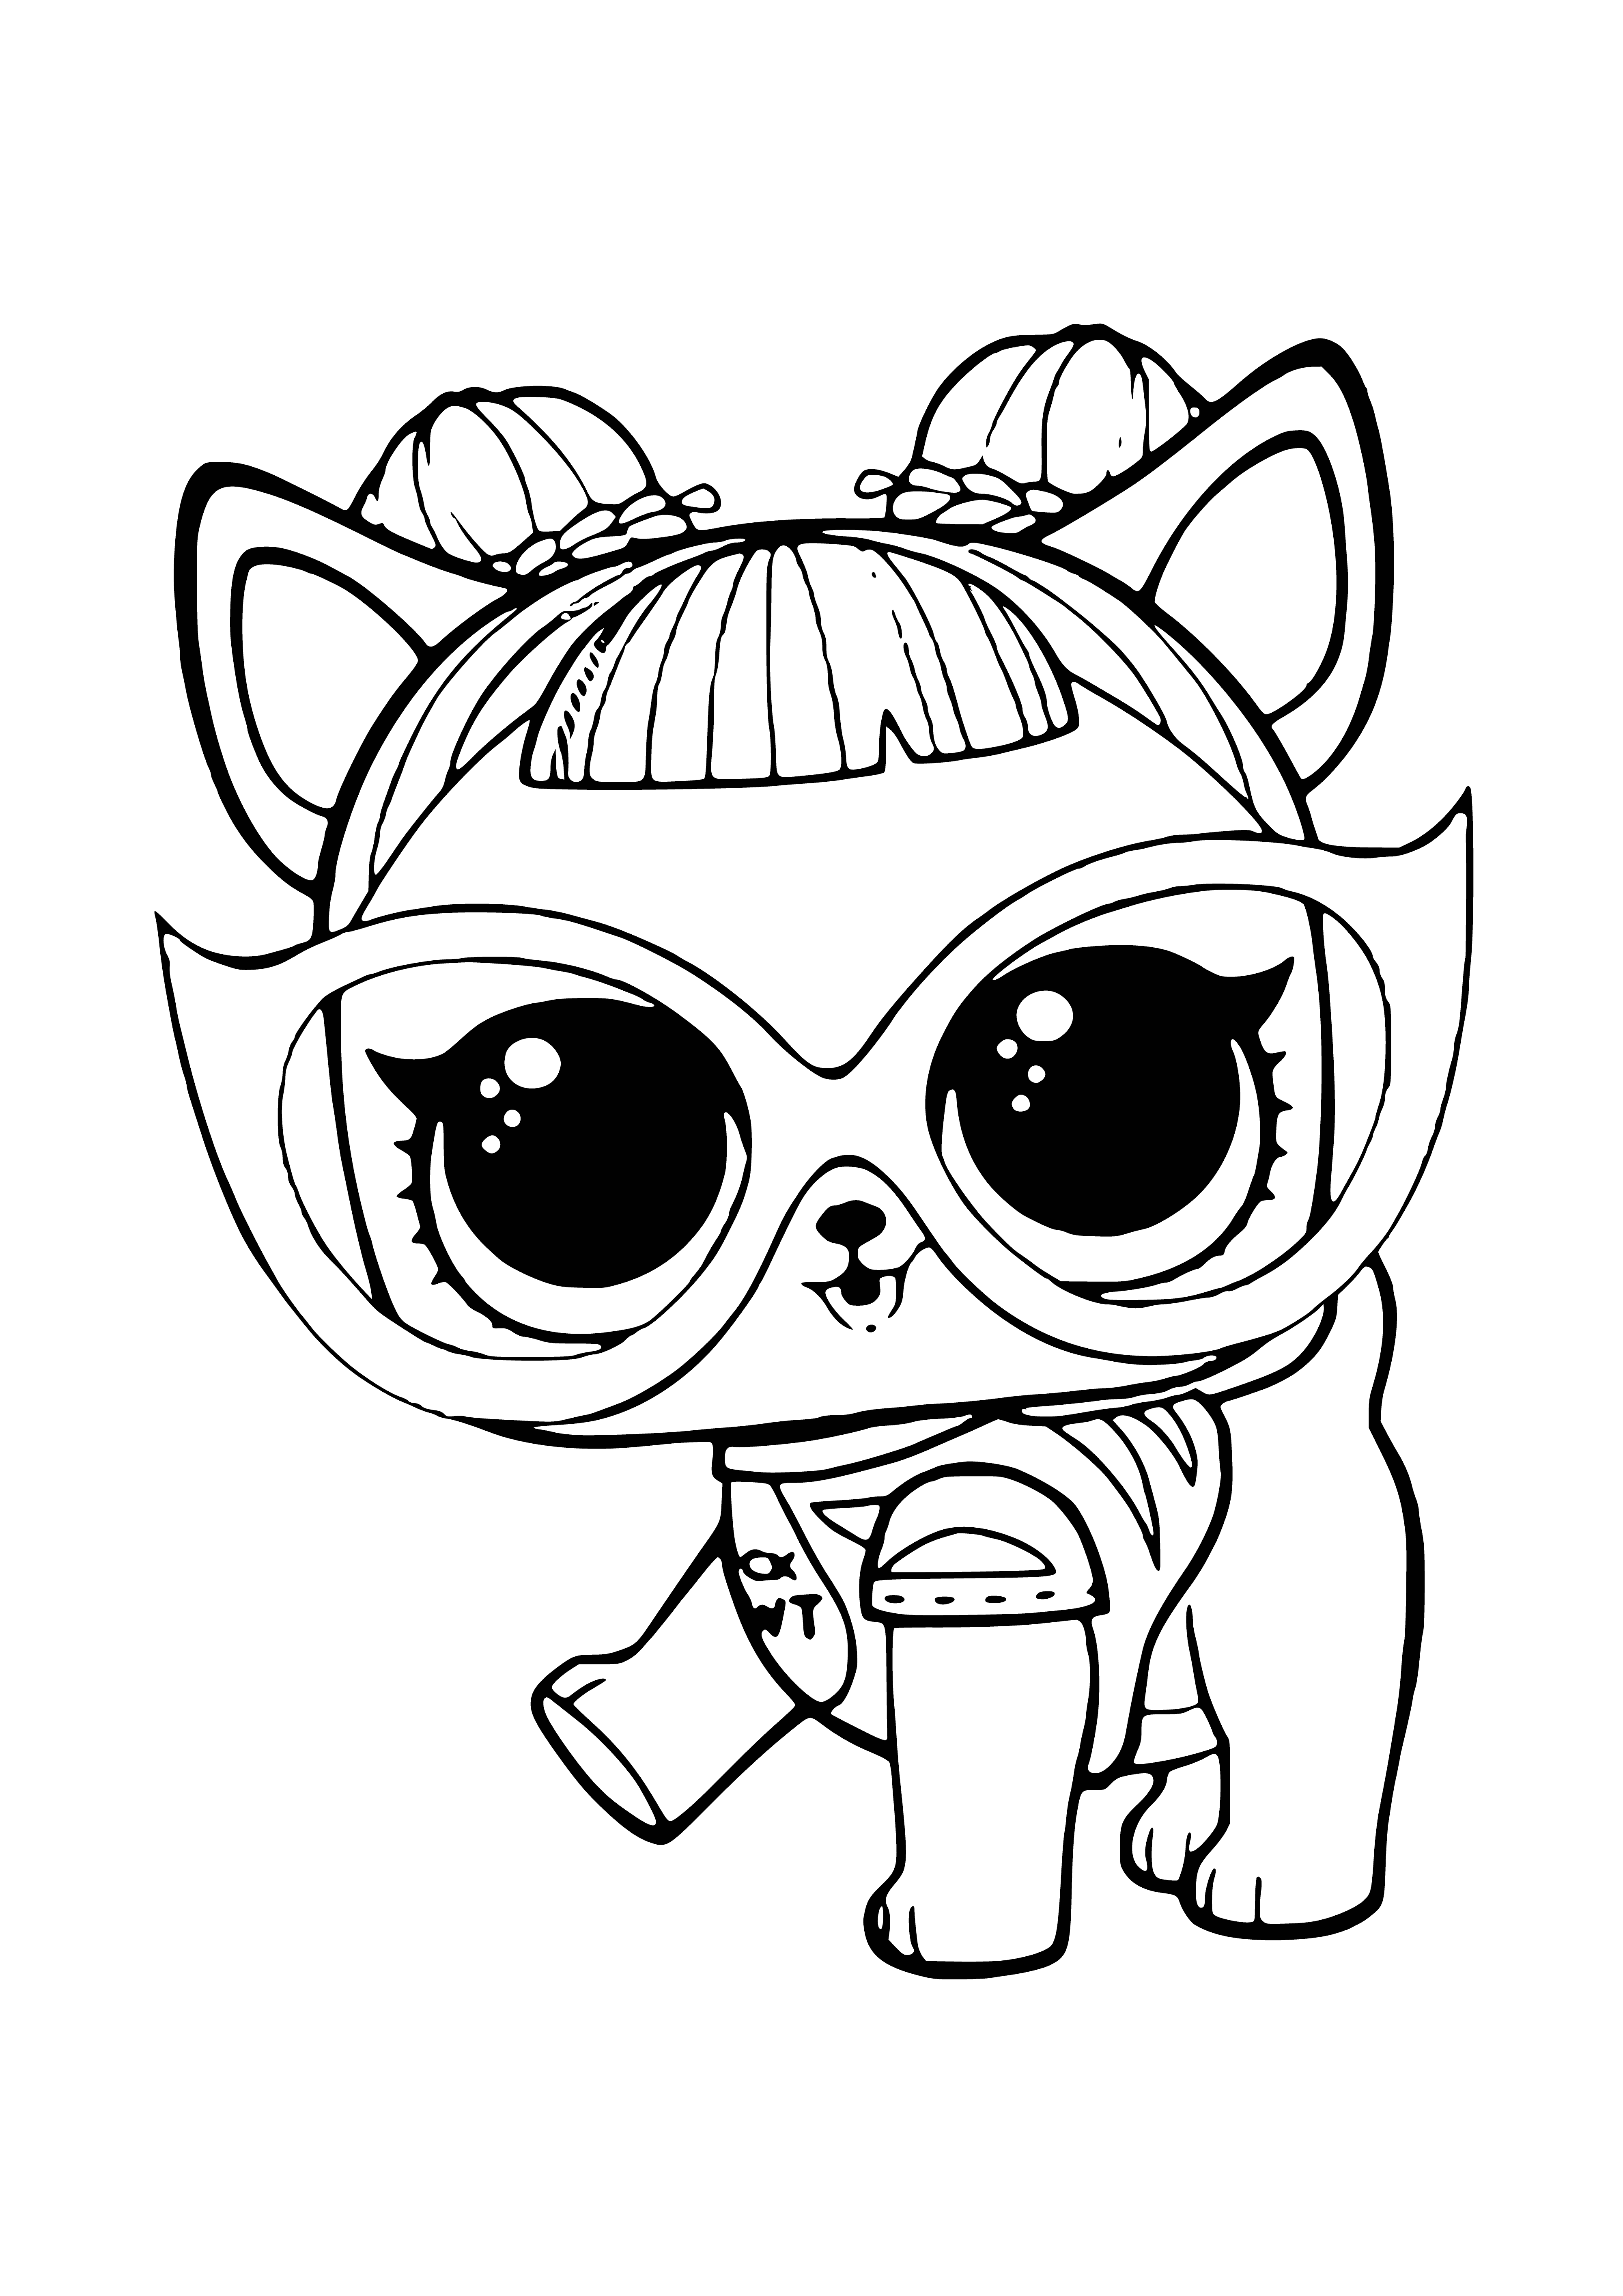 coloring page: Adorable light brown pup with big ears and eyes, looking at the camera on a white surface.